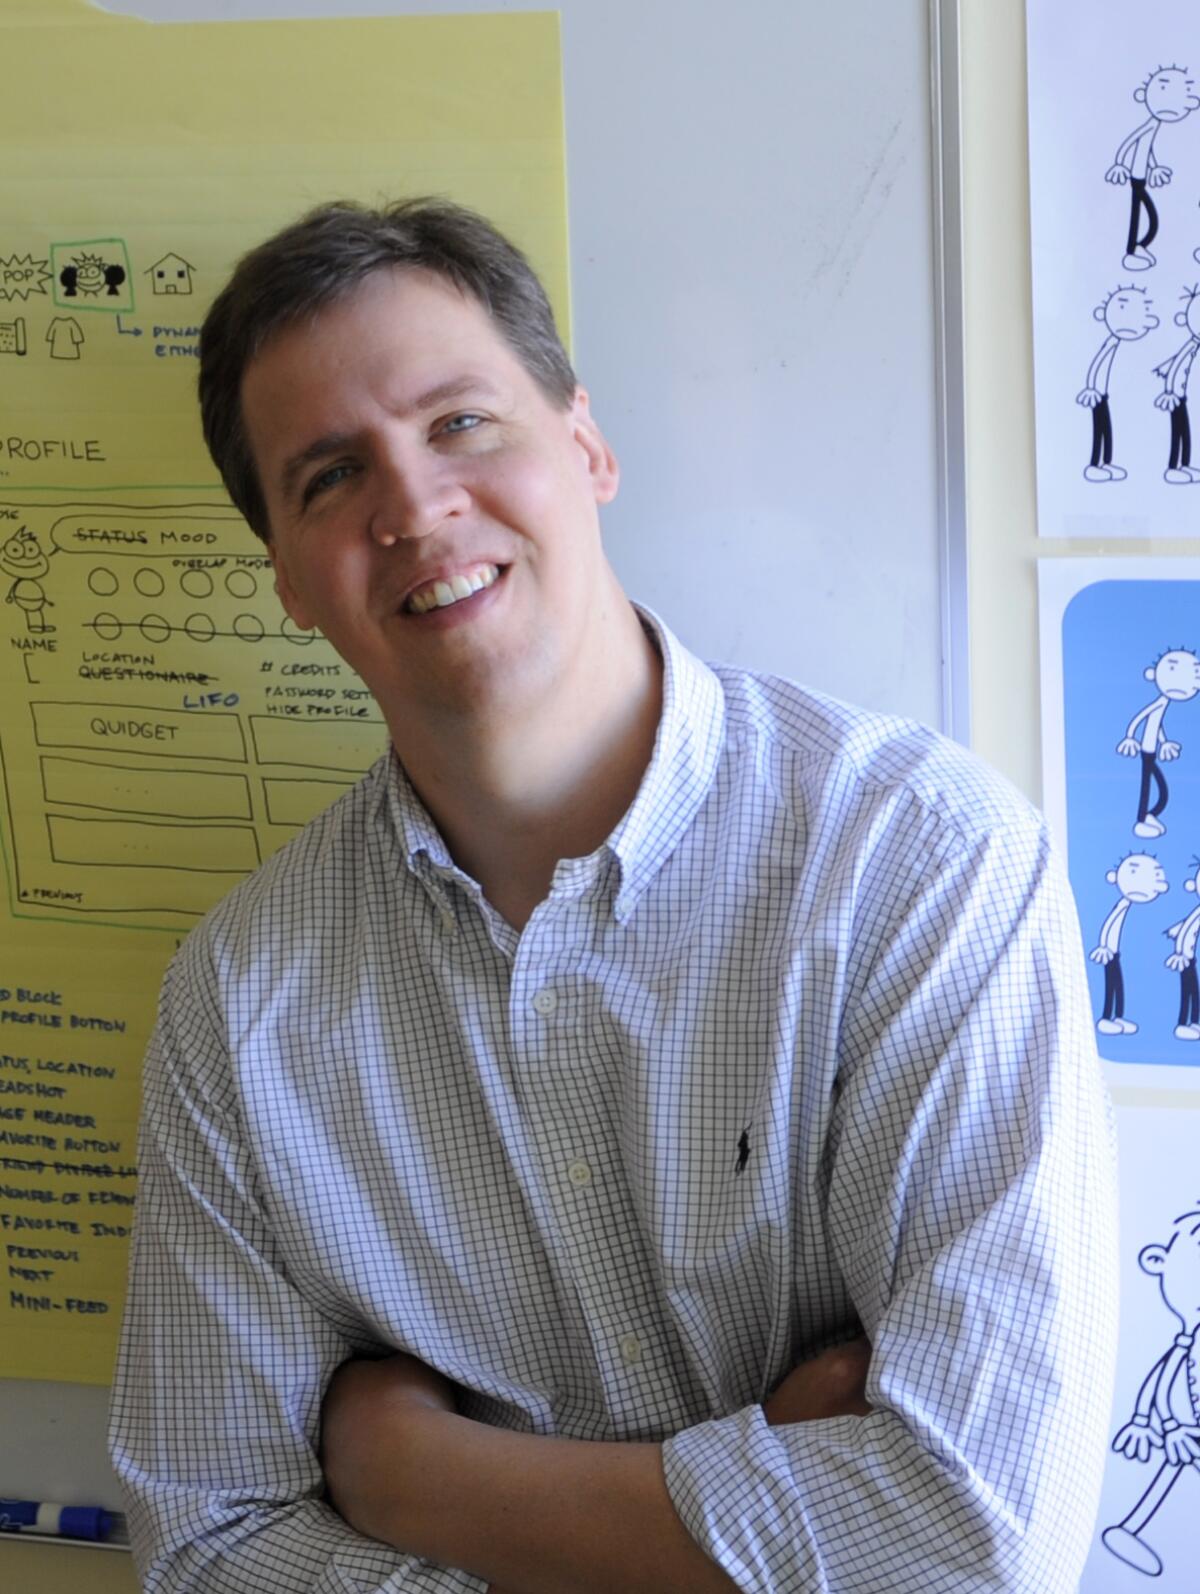 Jeff Kinney leans against a wall in his office.